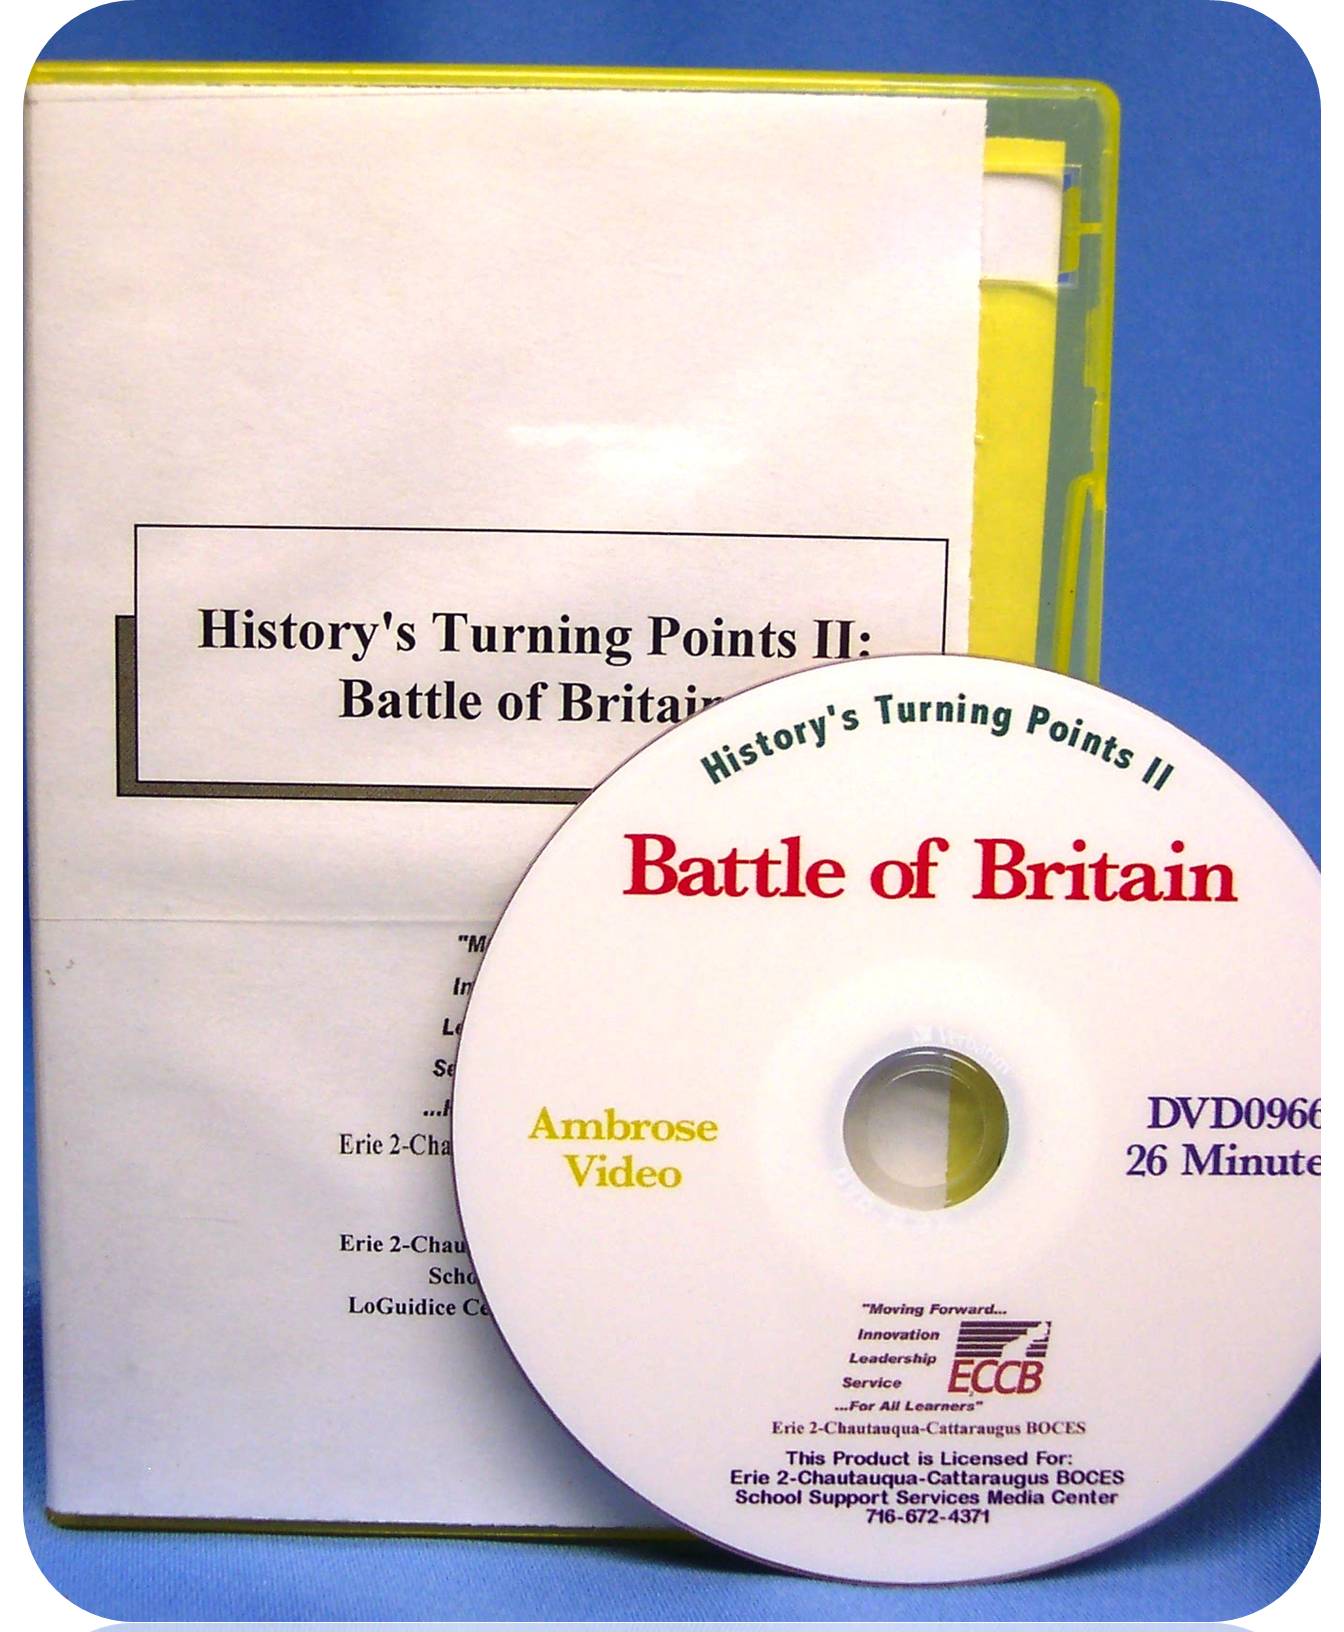 History's Turning Points II: Battle of Britain